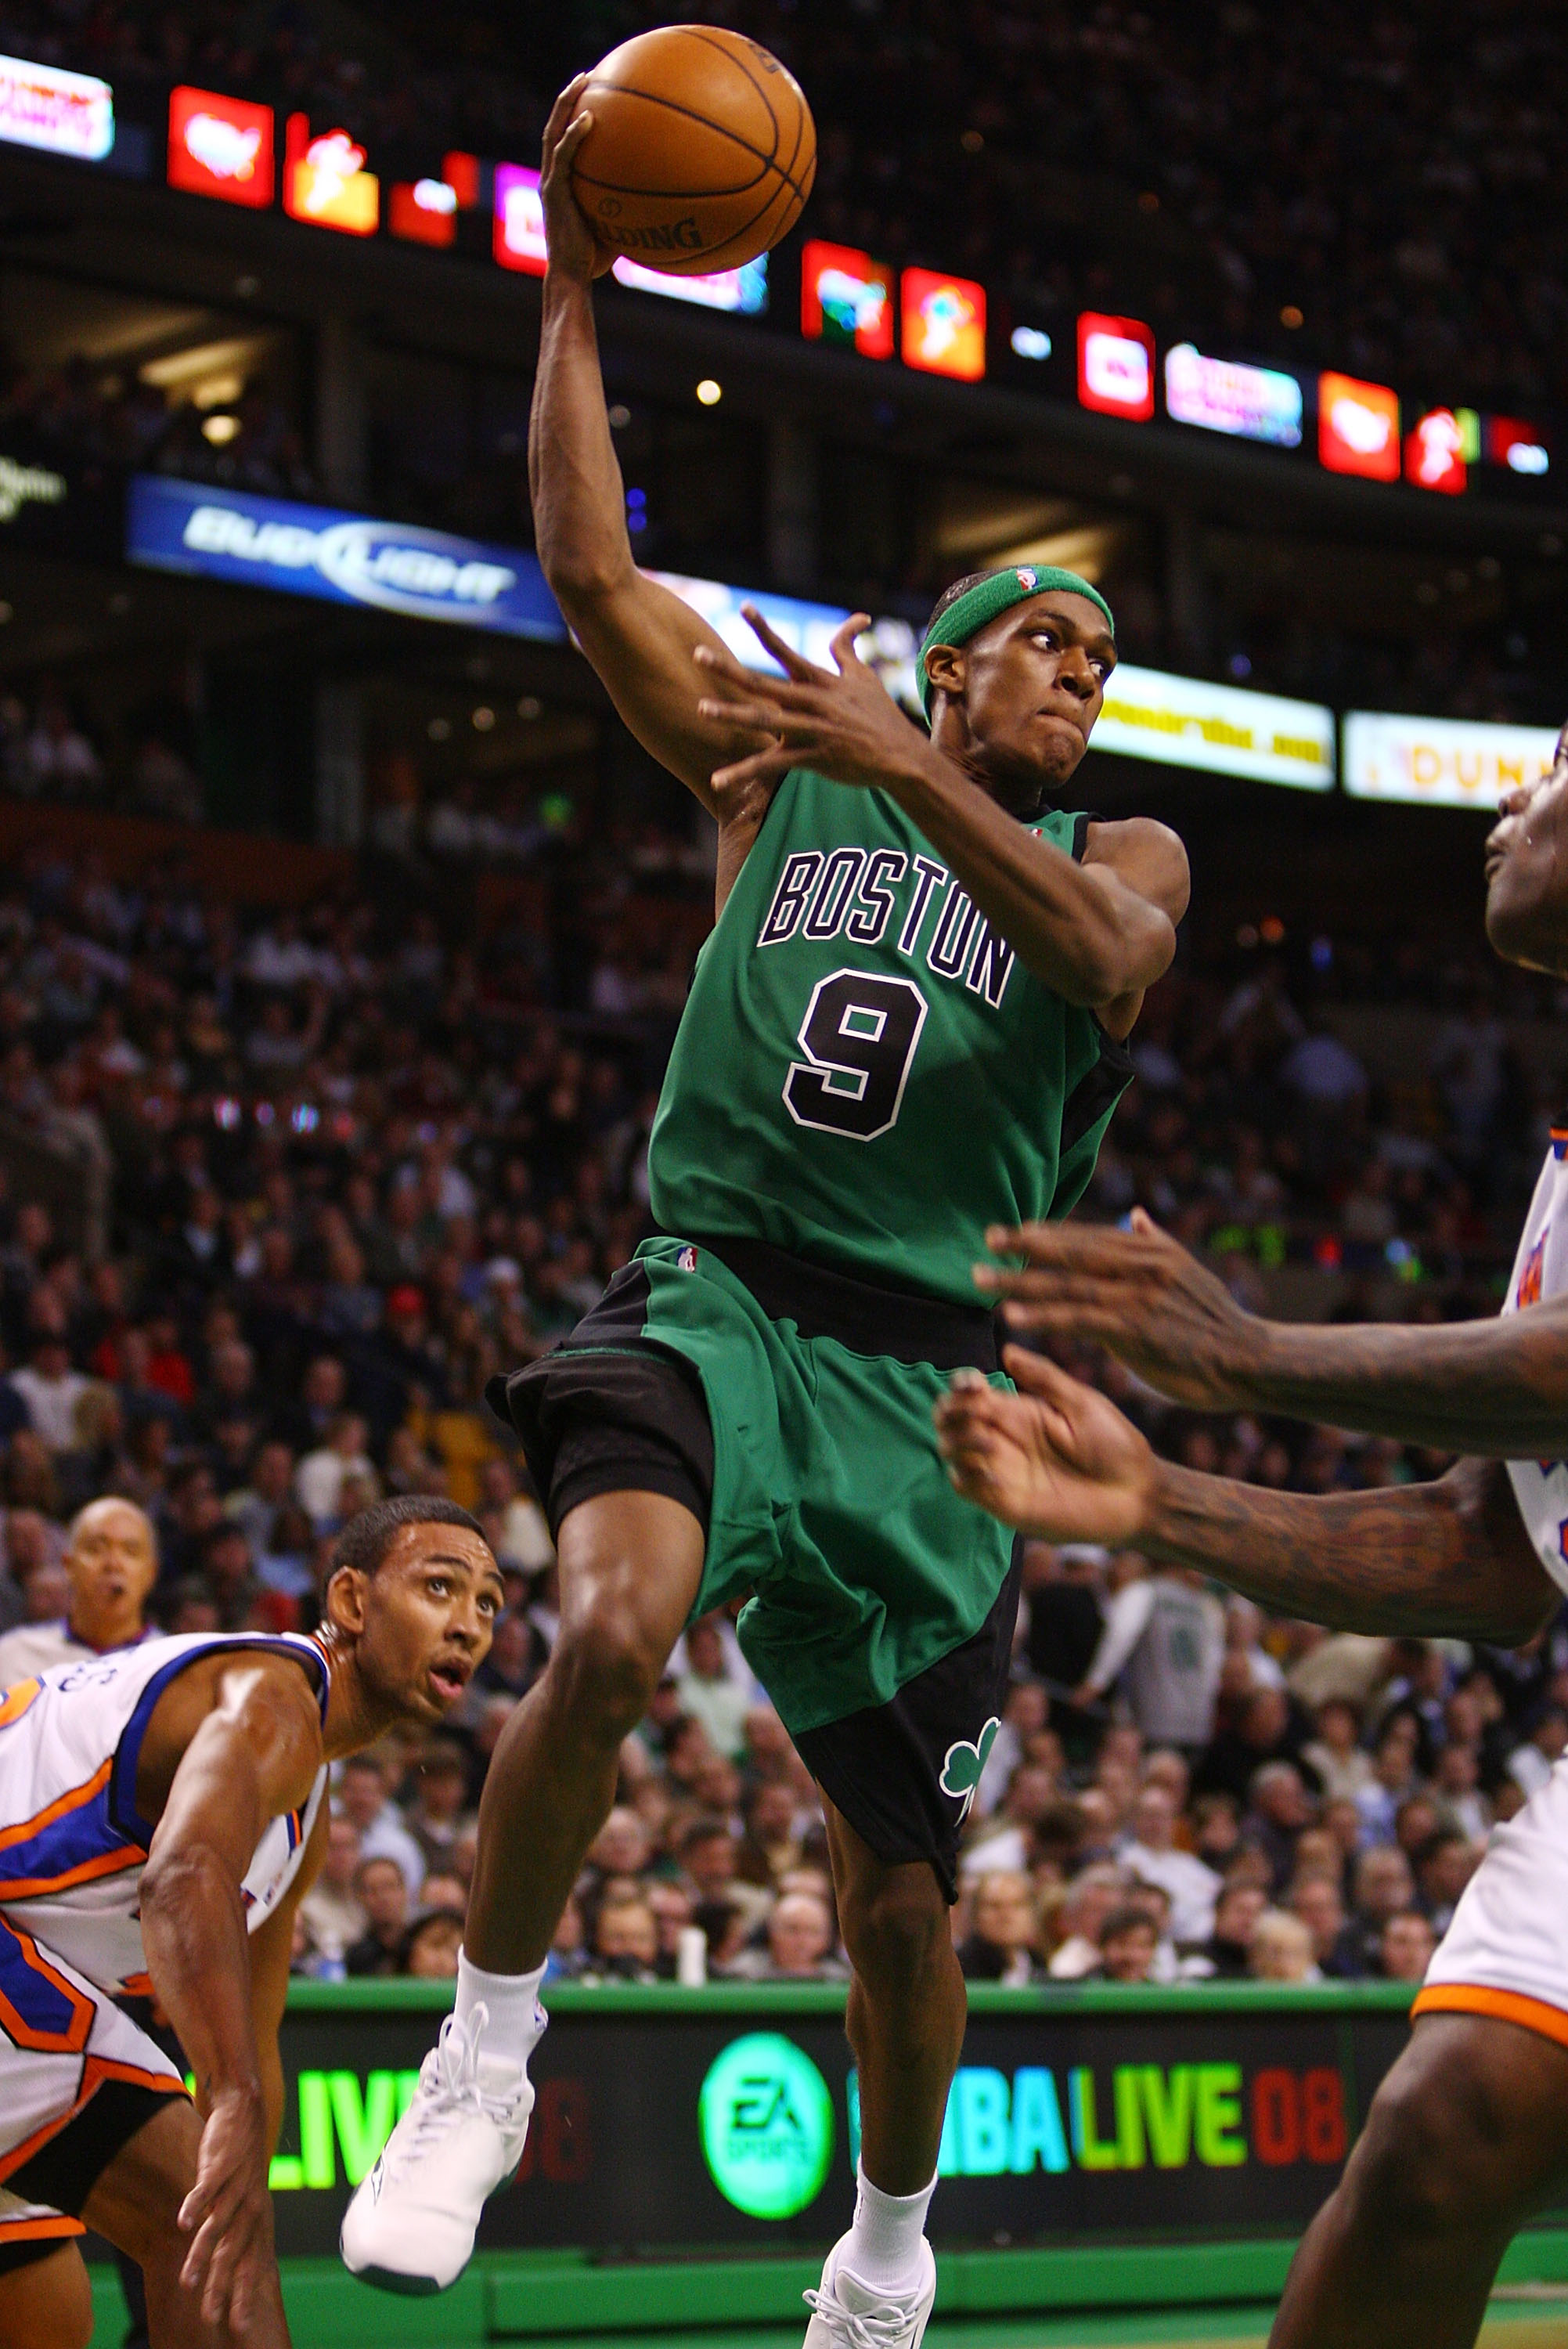 BOSTON - NOVEMBER 29:  Rajon Rondo #9 of the Boston Celtics passes the ball as Jared Jeffries #20 of the New York Knicks defends at the TD Banknorth Garden November 29, 2007 in Boston, Massachusetts.  NOTE TO USER: User expressly acknowledges and agrees t